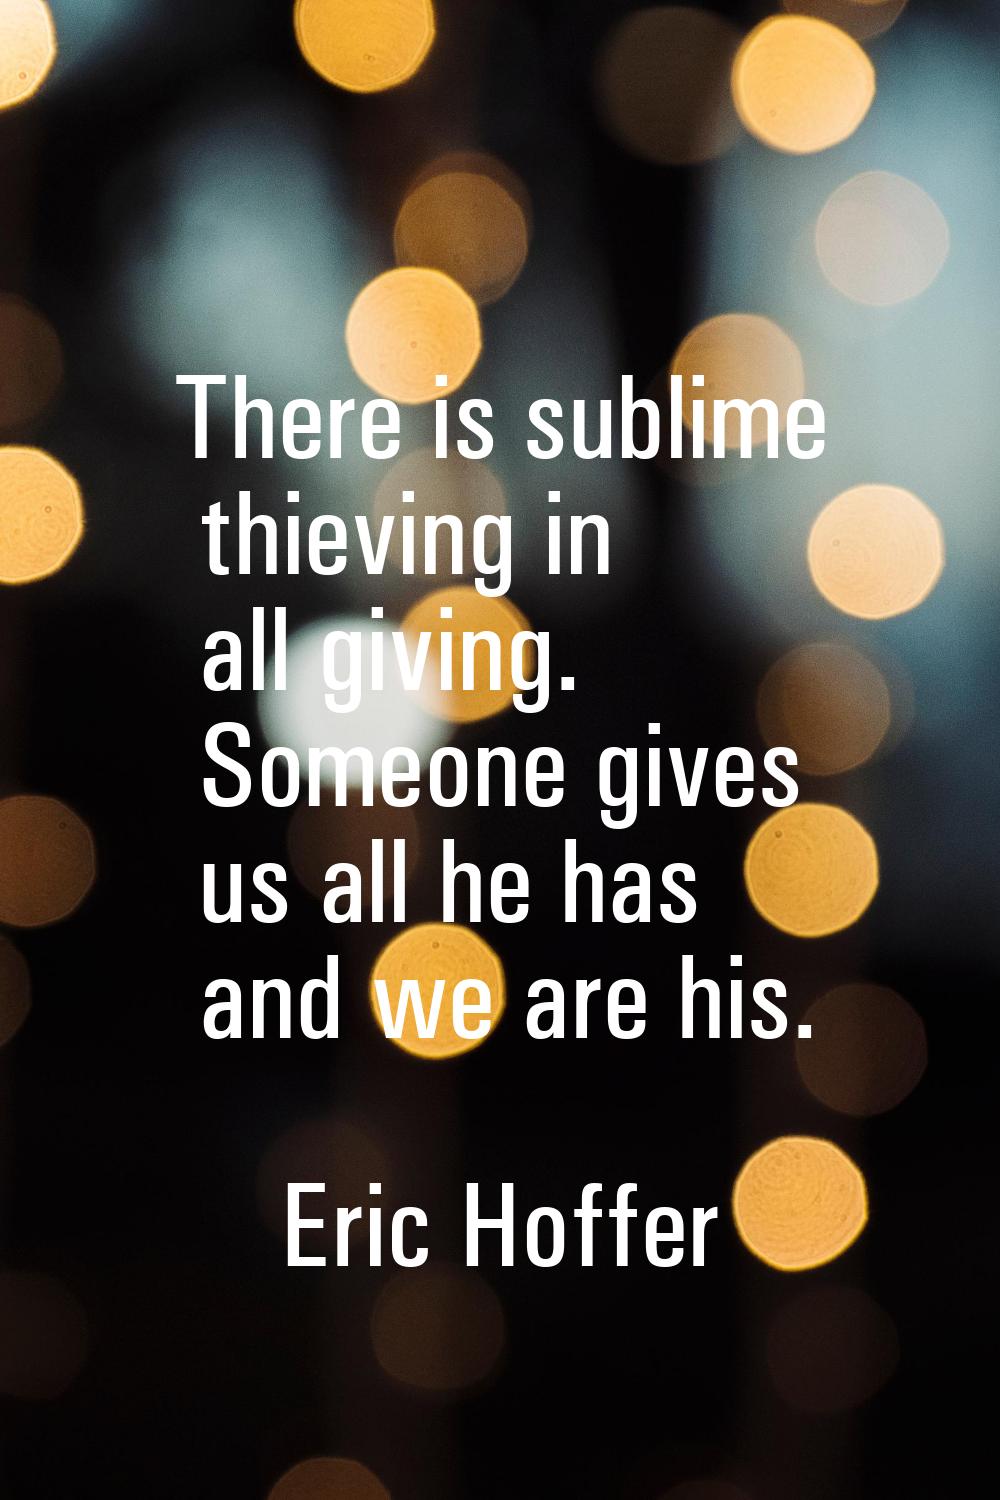 There is sublime thieving in all giving. Someone gives us all he has and we are his.